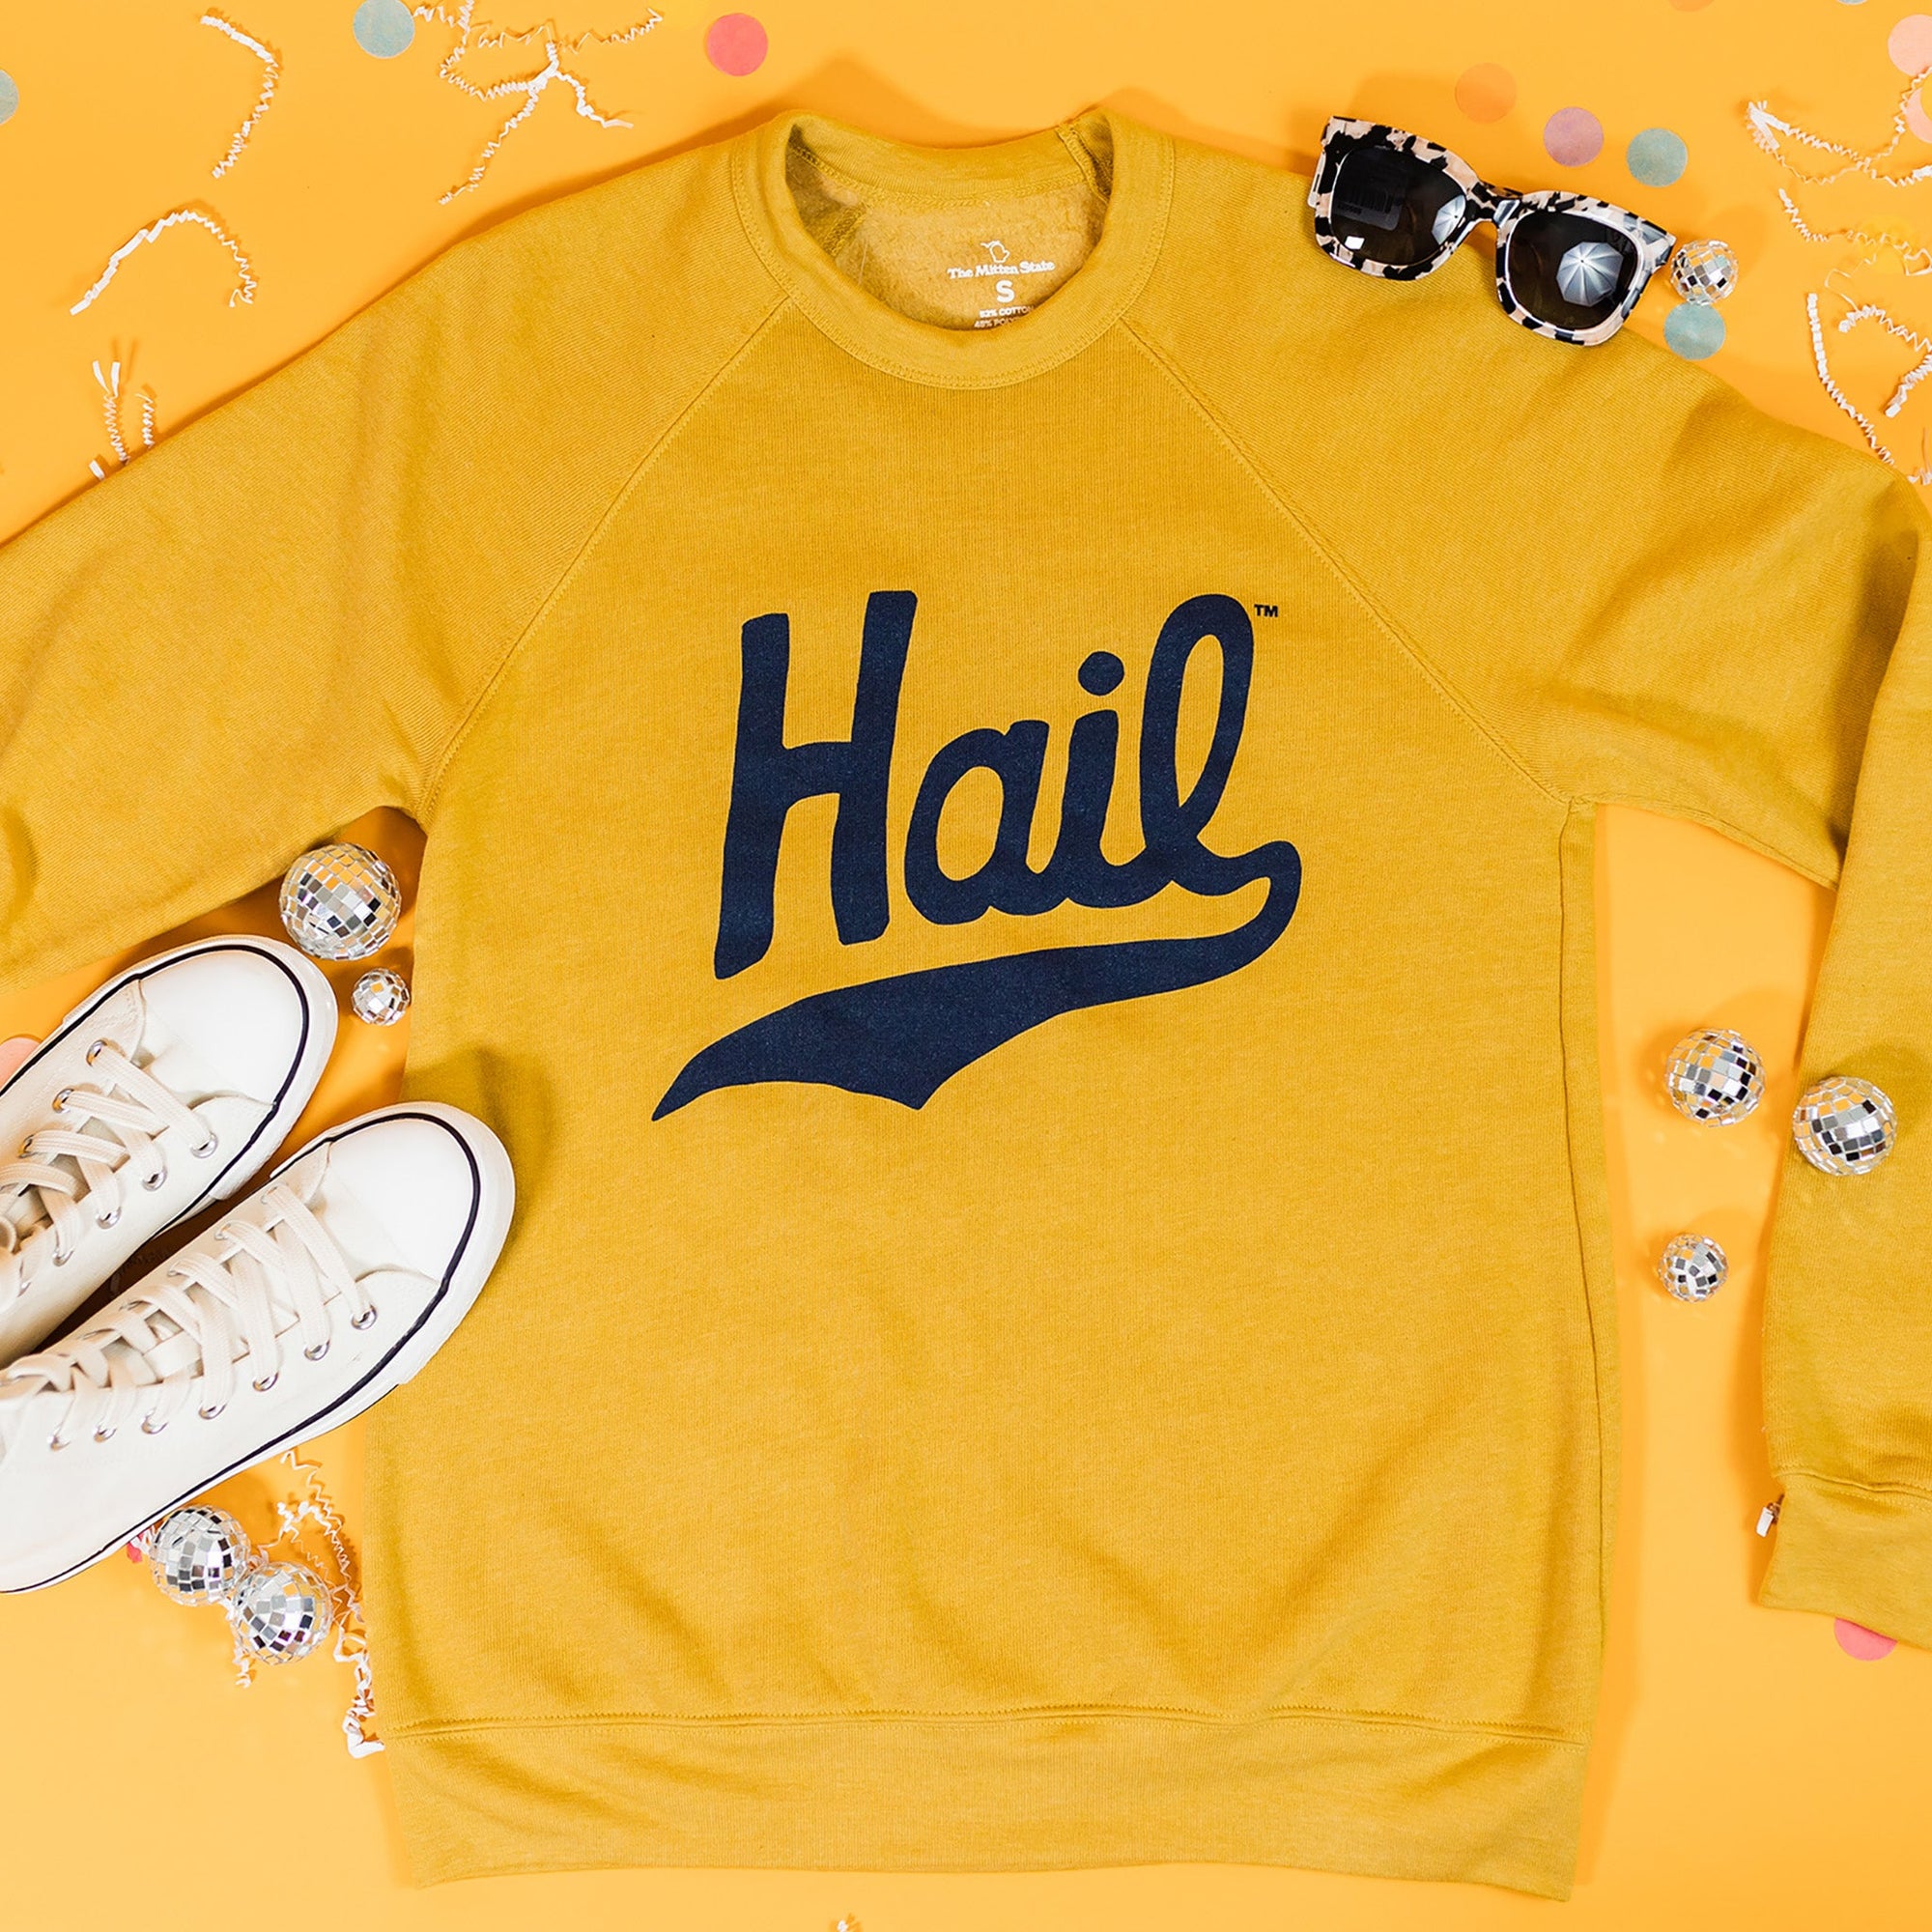 On a sunny mustard background sits a sweatshirt with white crinkle and big, colorful confetti scattered around. There are mini disco balls, sunglasses, and a pair of white sneakers. This mustard crewneck sweatshirt features a vintage, hand lettered "Hail" in navy.